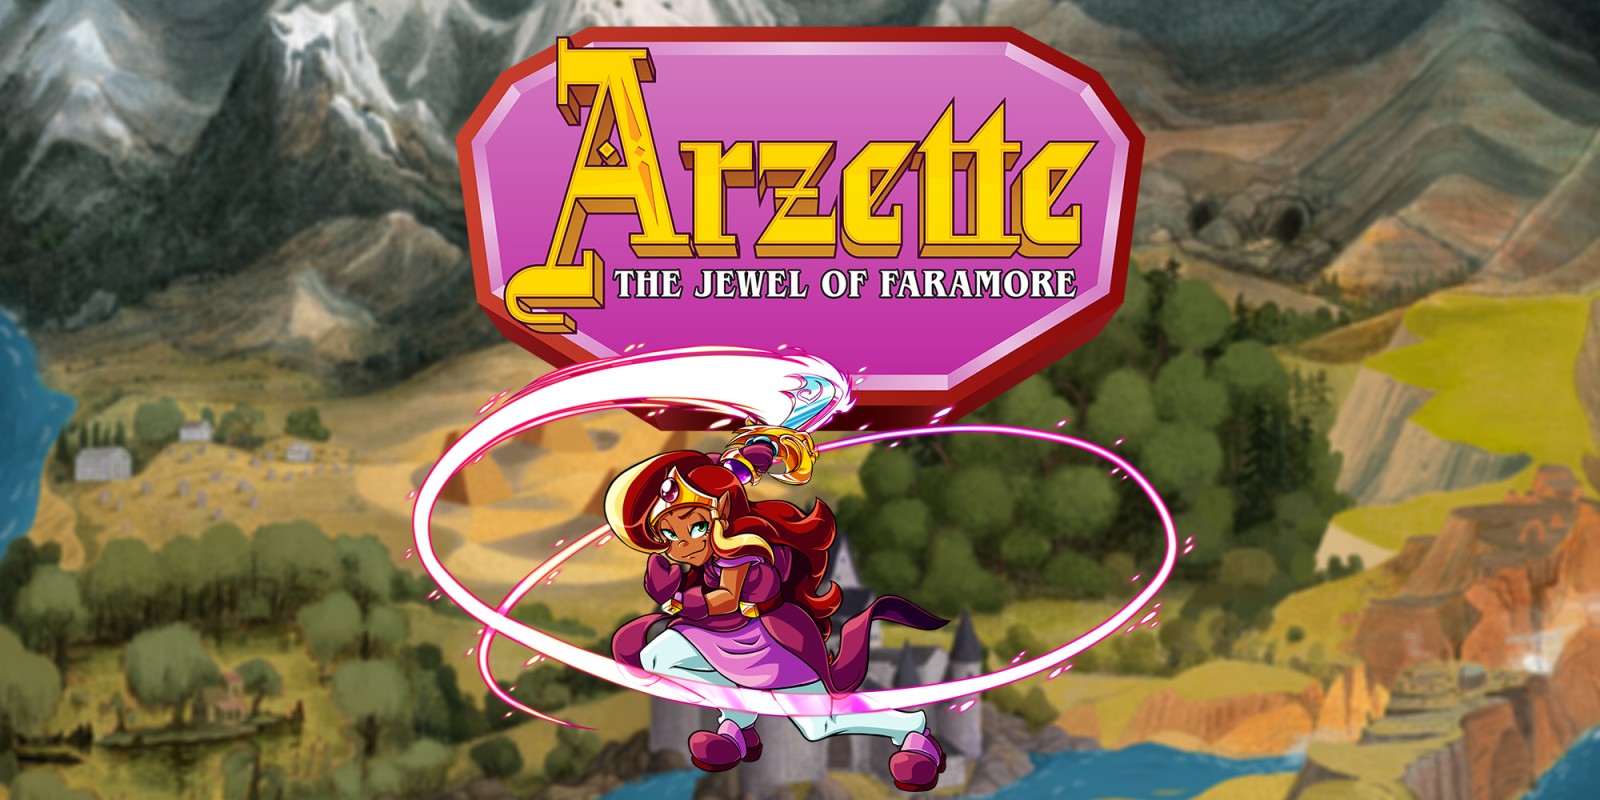 Arzette The Jewel of Faramore Collection PS5 Version Full Game Setup Free Download